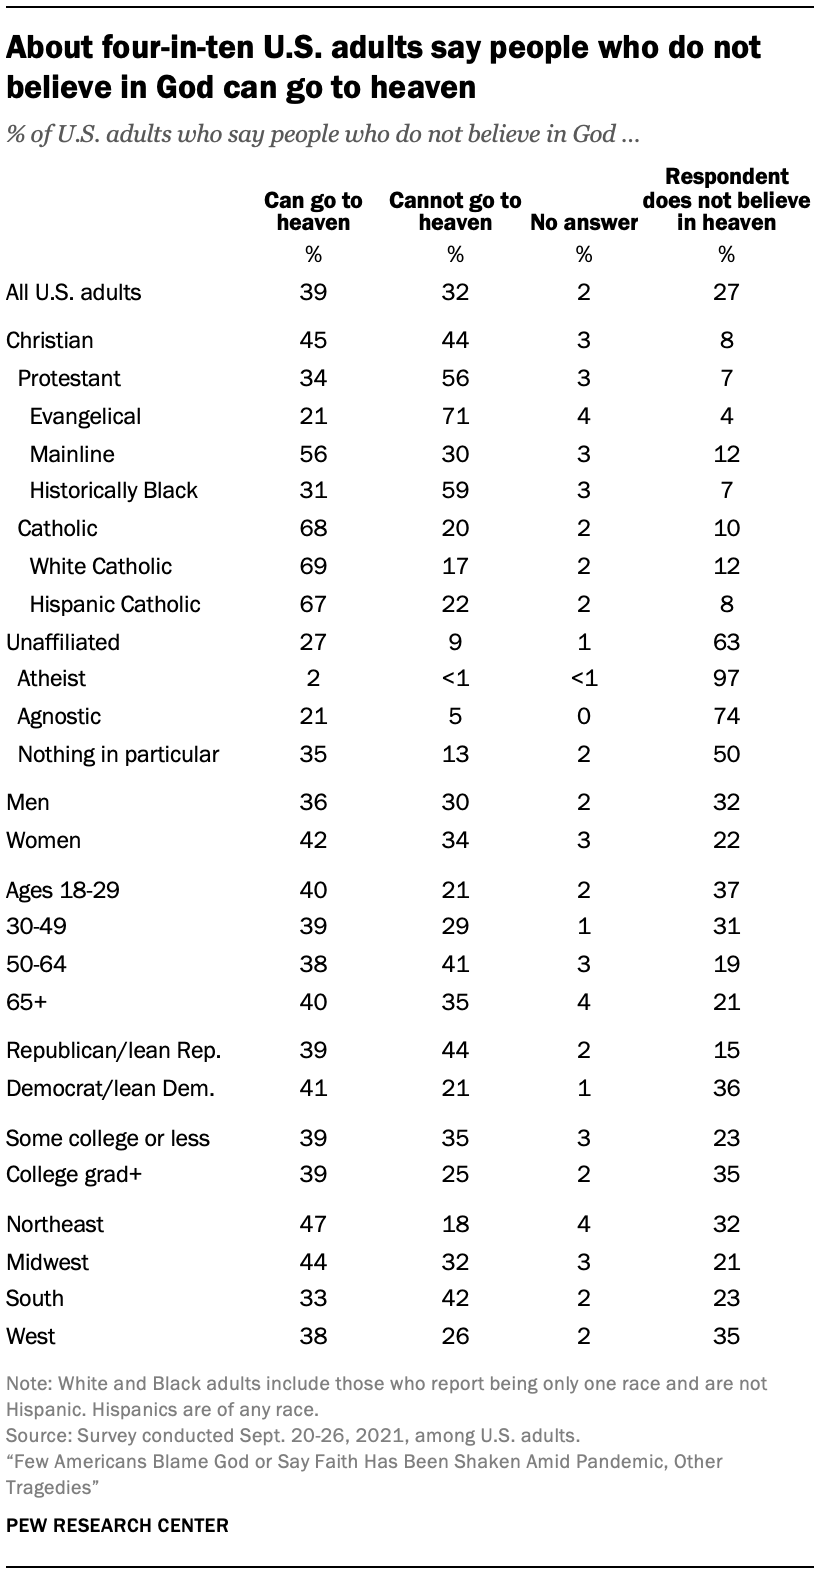 About four-in-ten U.S. adults say people who do not believe in God can go to heaven